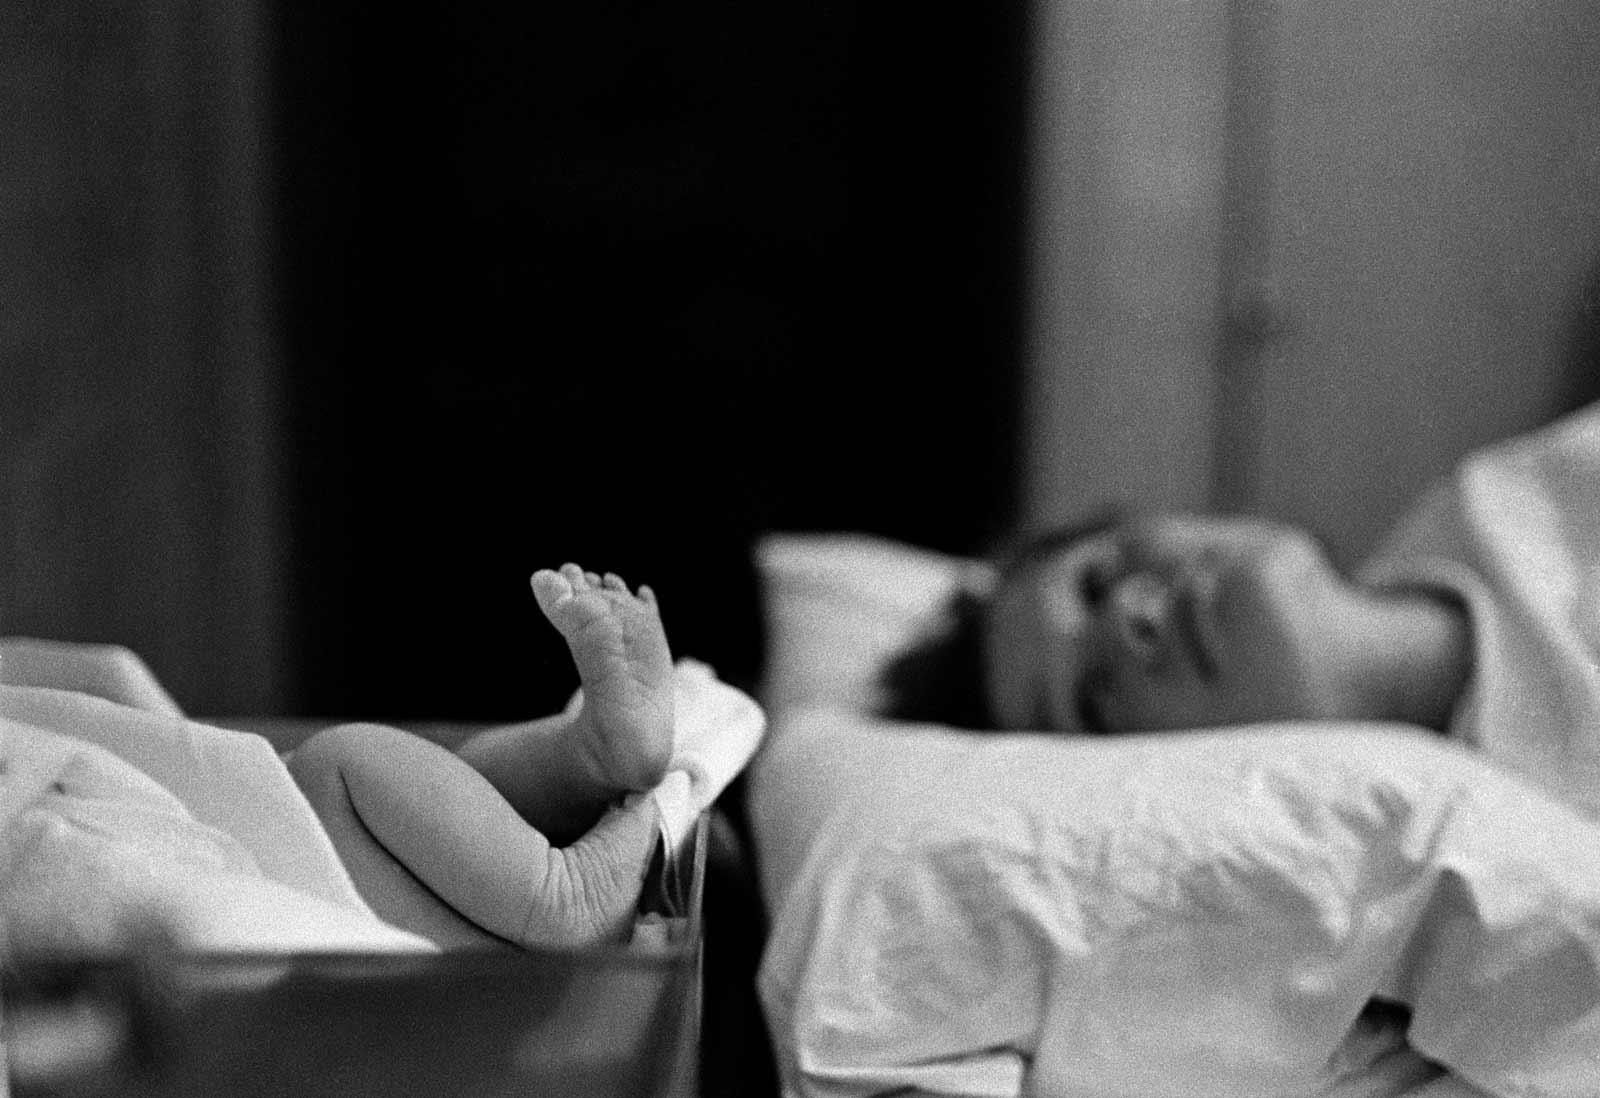 A mother looking at her newborn baby, Long Island, New York, 1959